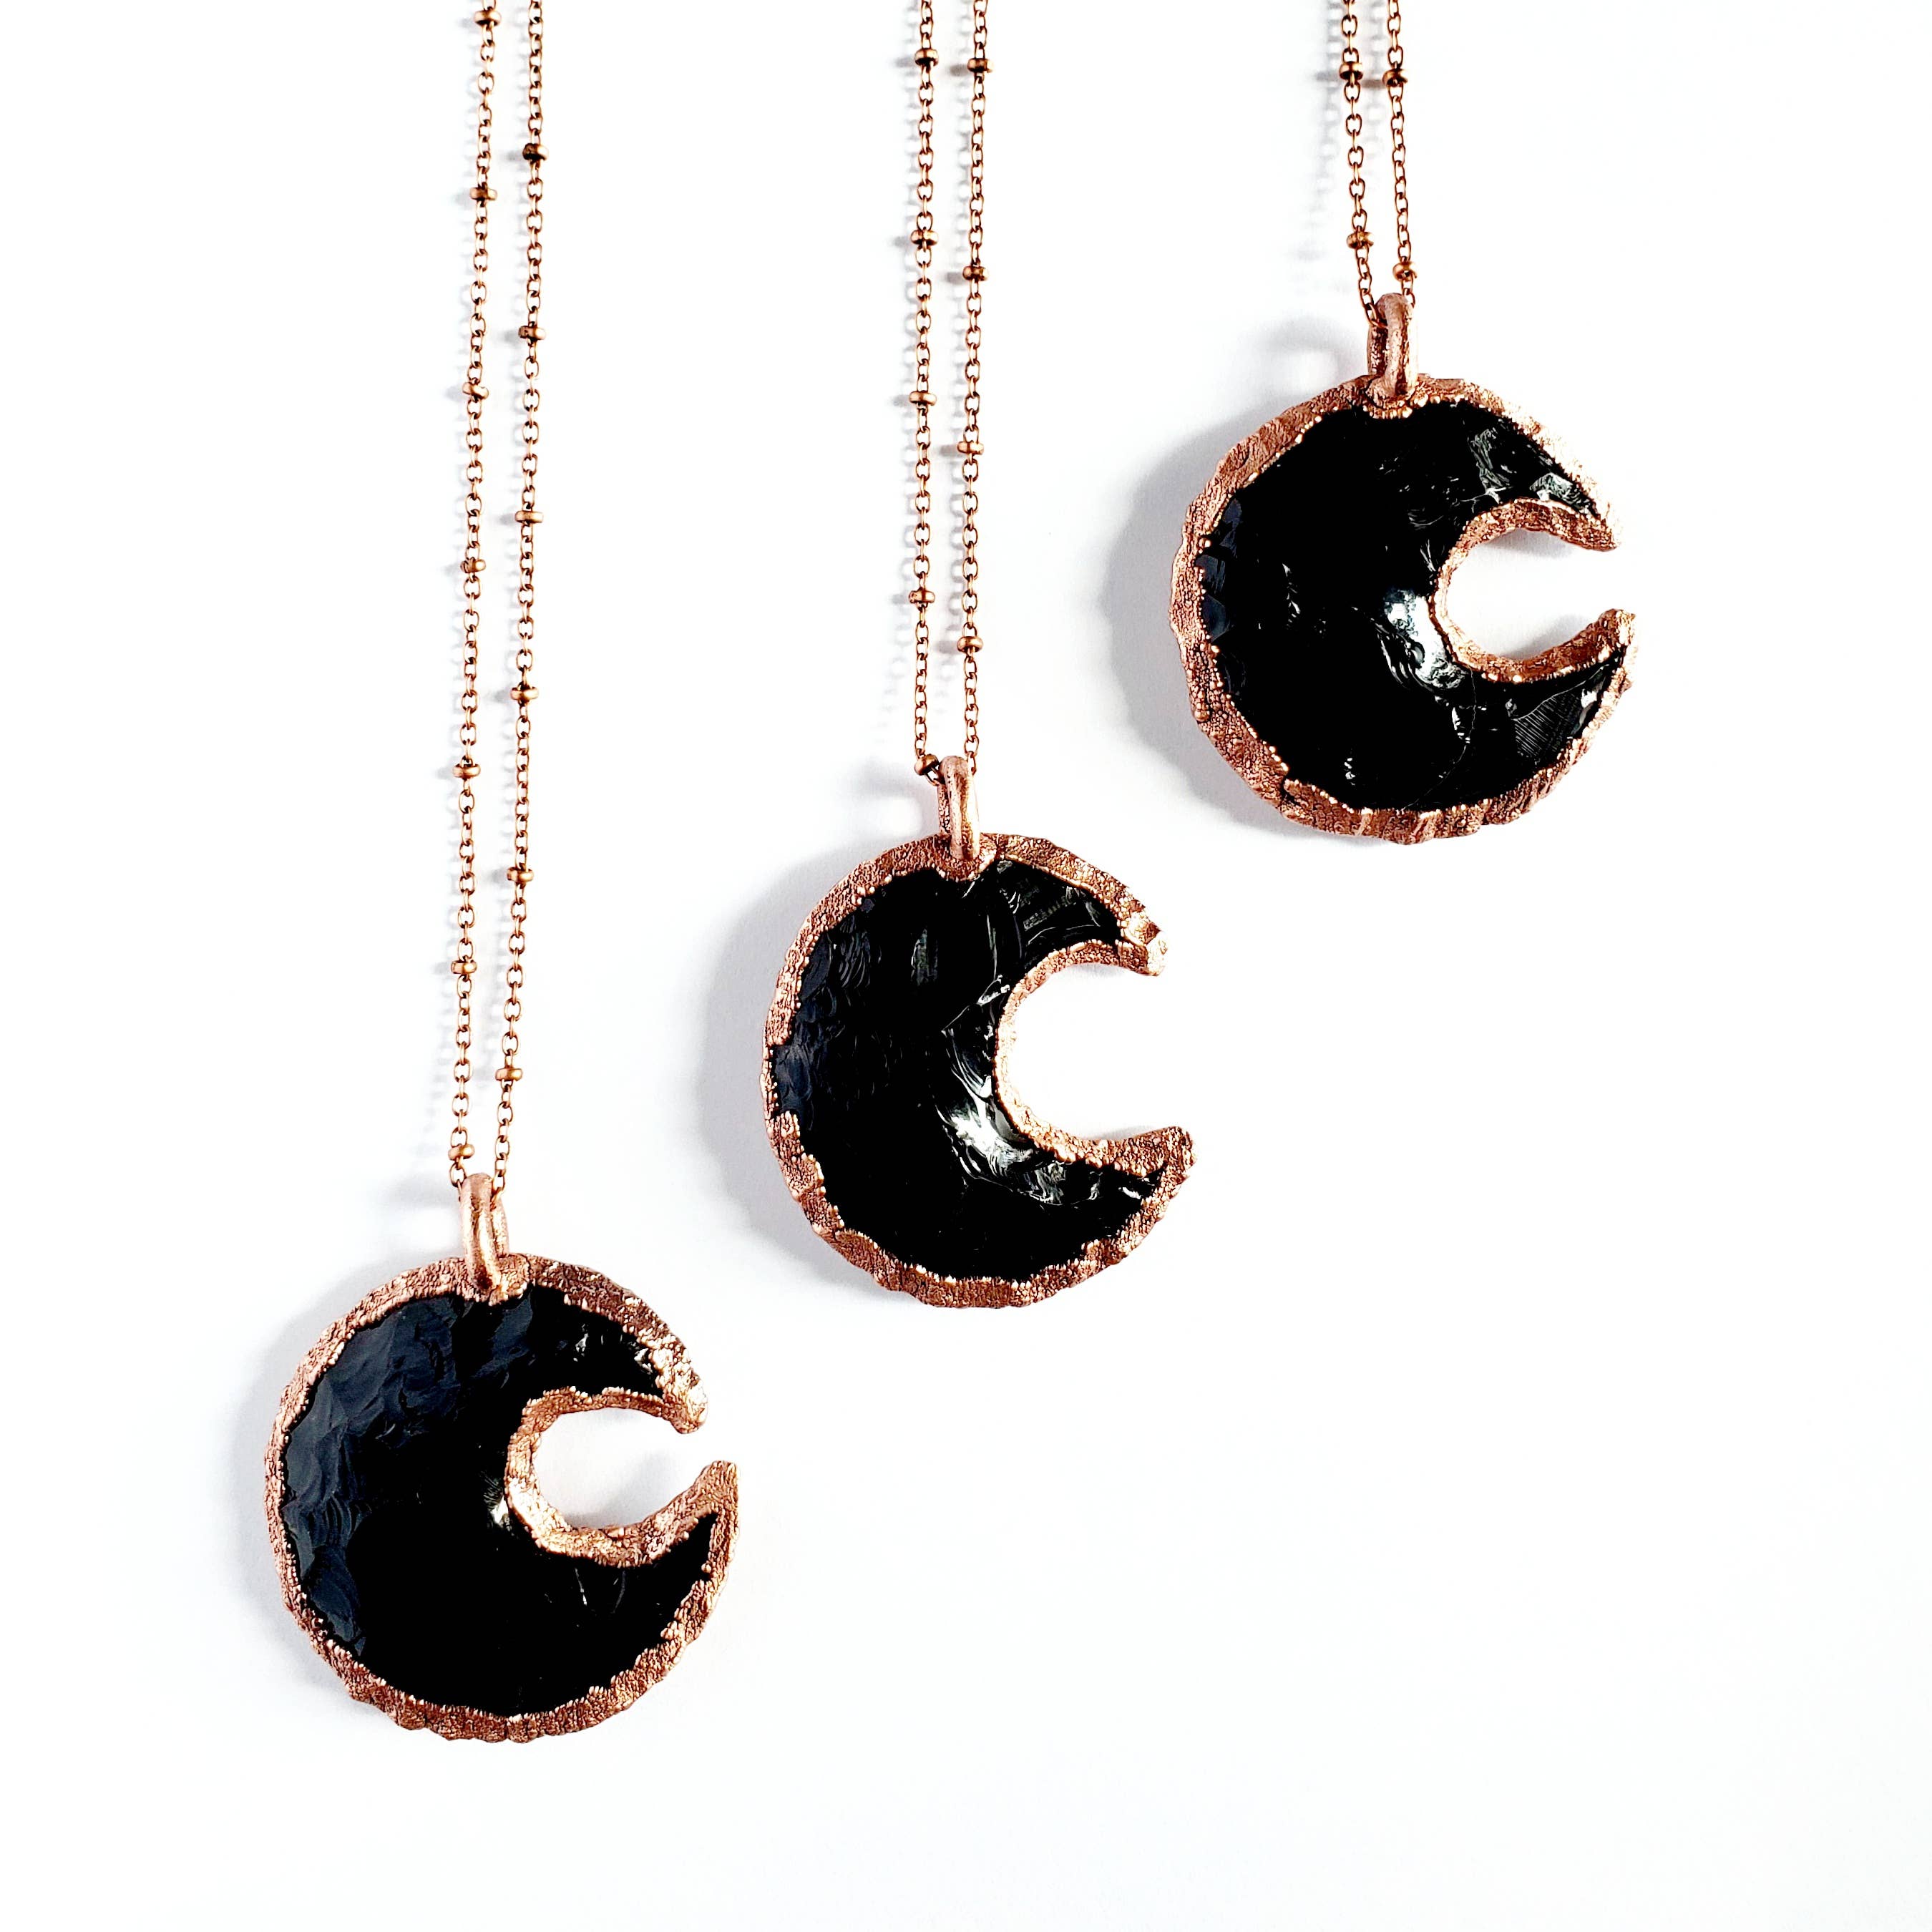 Obsidian Crescent Moon Necklace - 20" Copper Chain